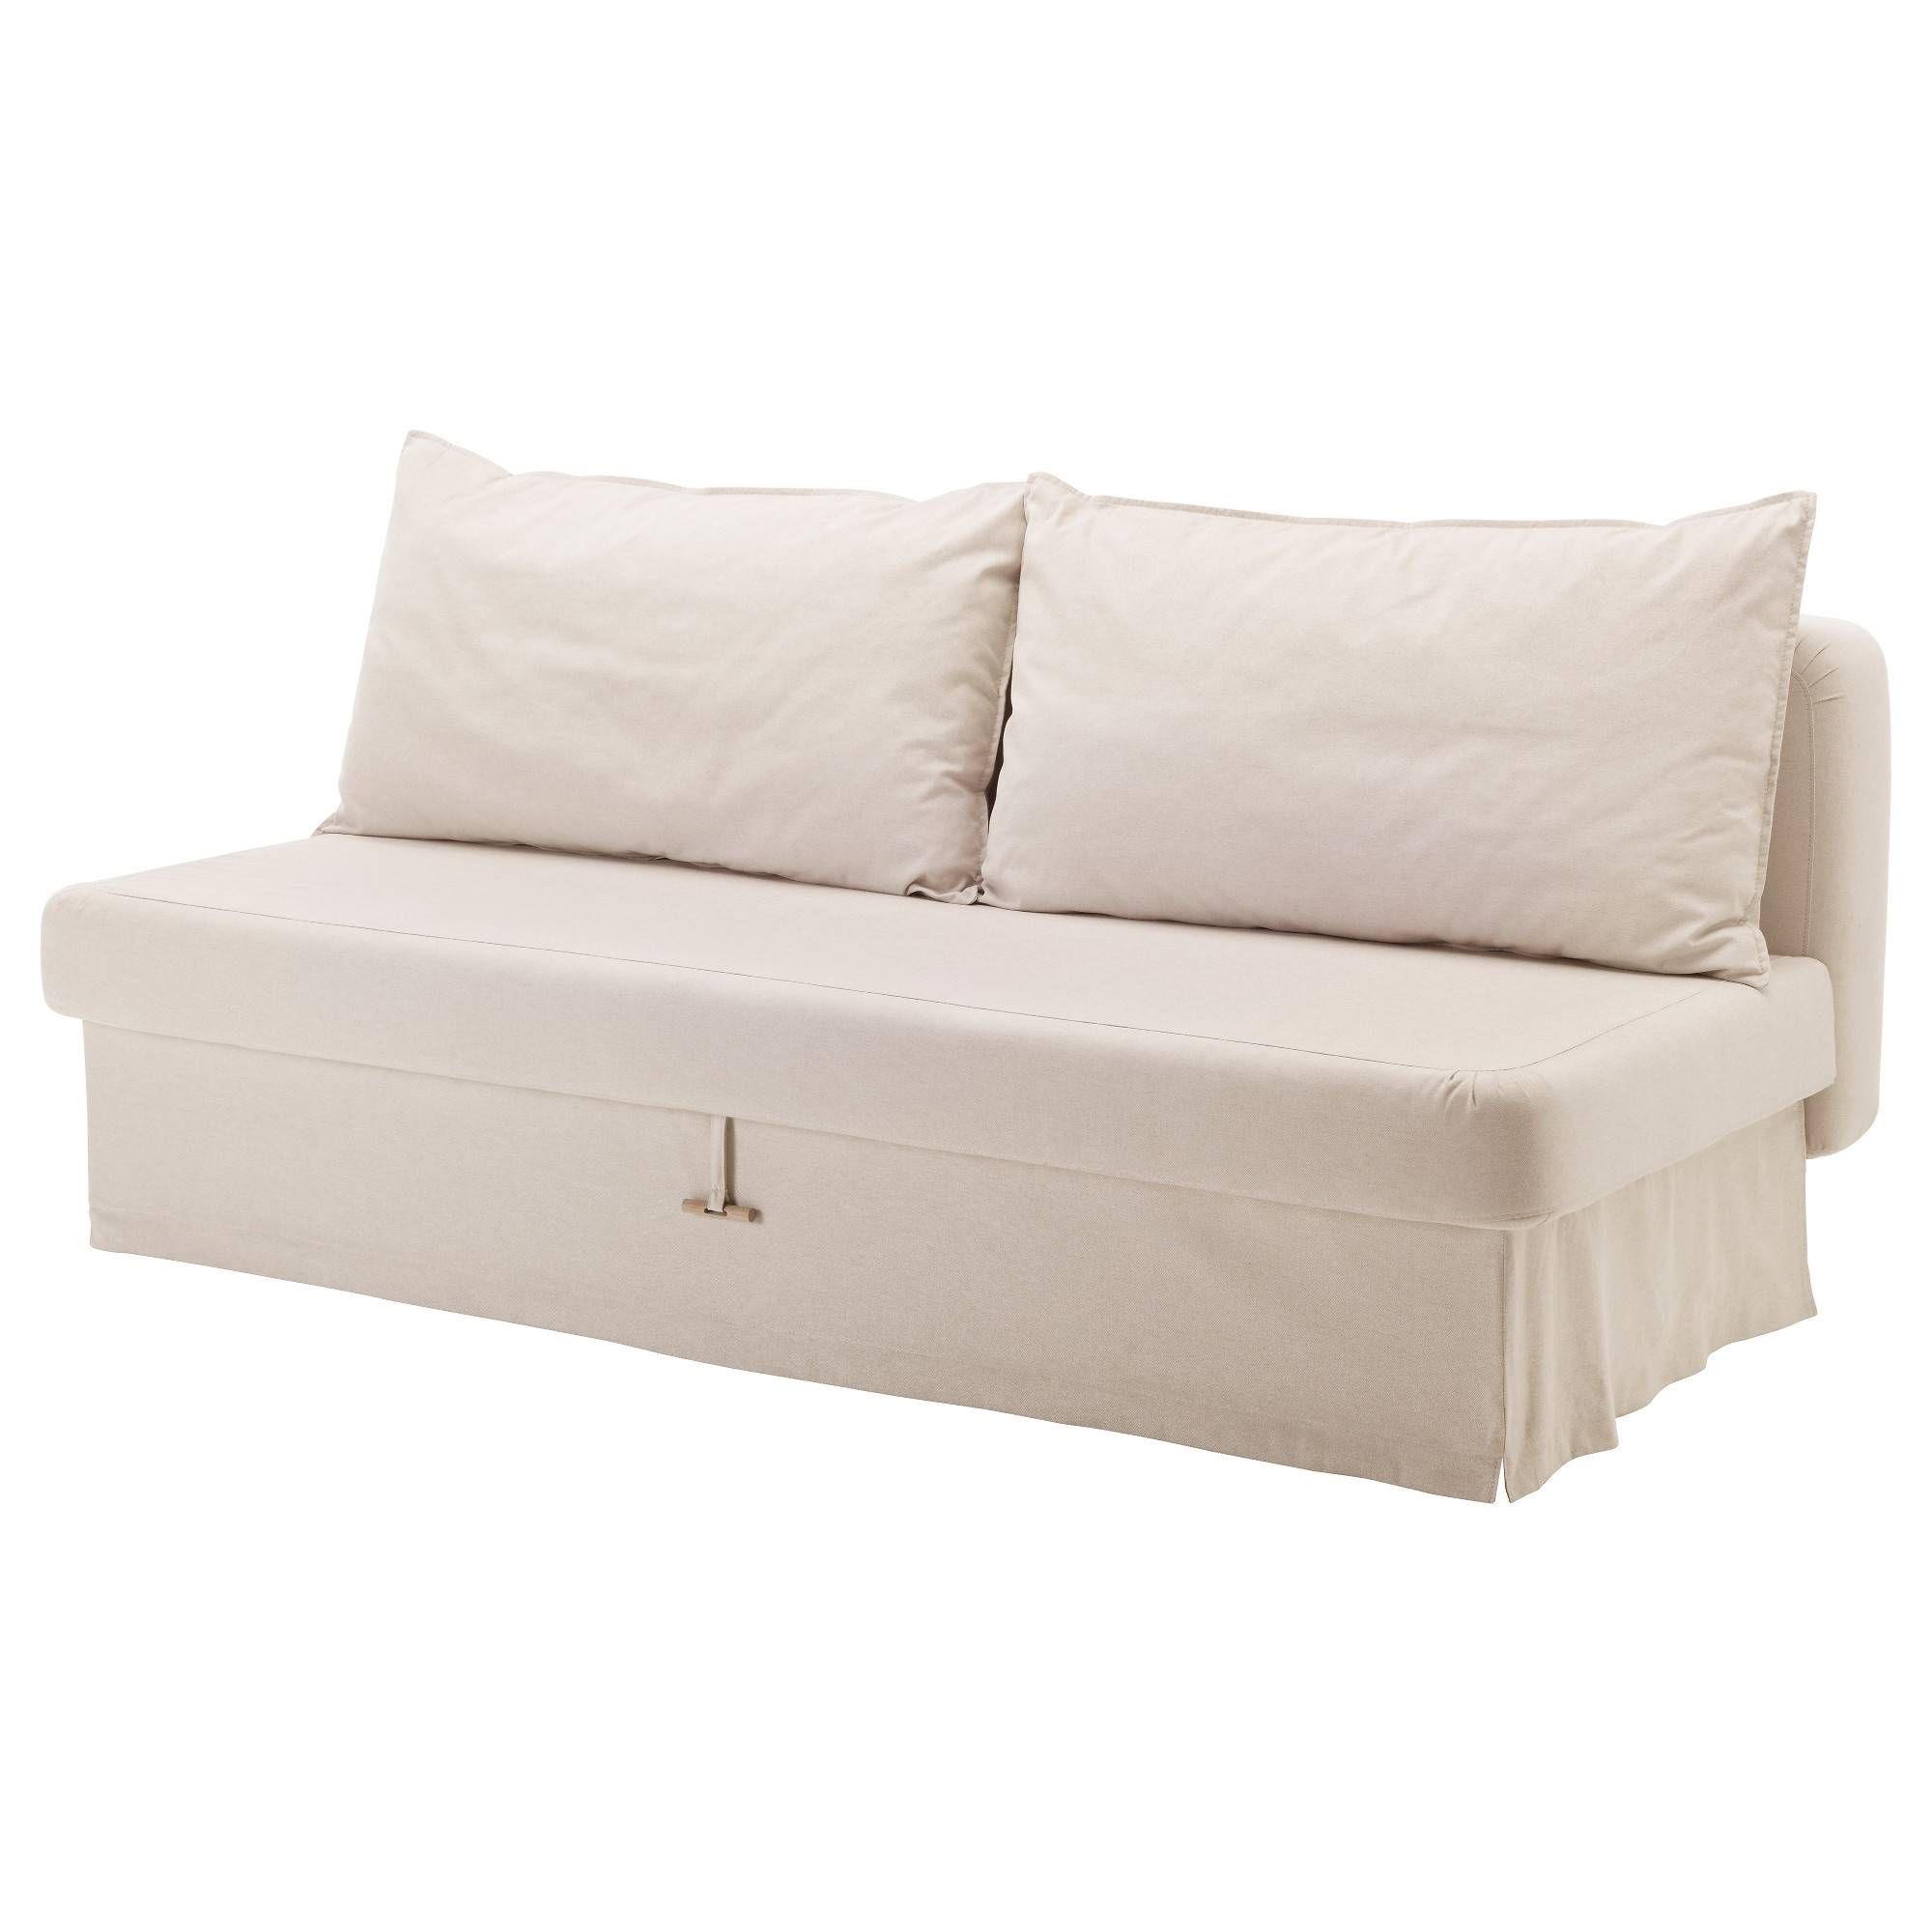 Himmene Three Seat Sofa Bed Lofallet Beige – Ikea For Storage Sofas Ikea (View 16 of 25)